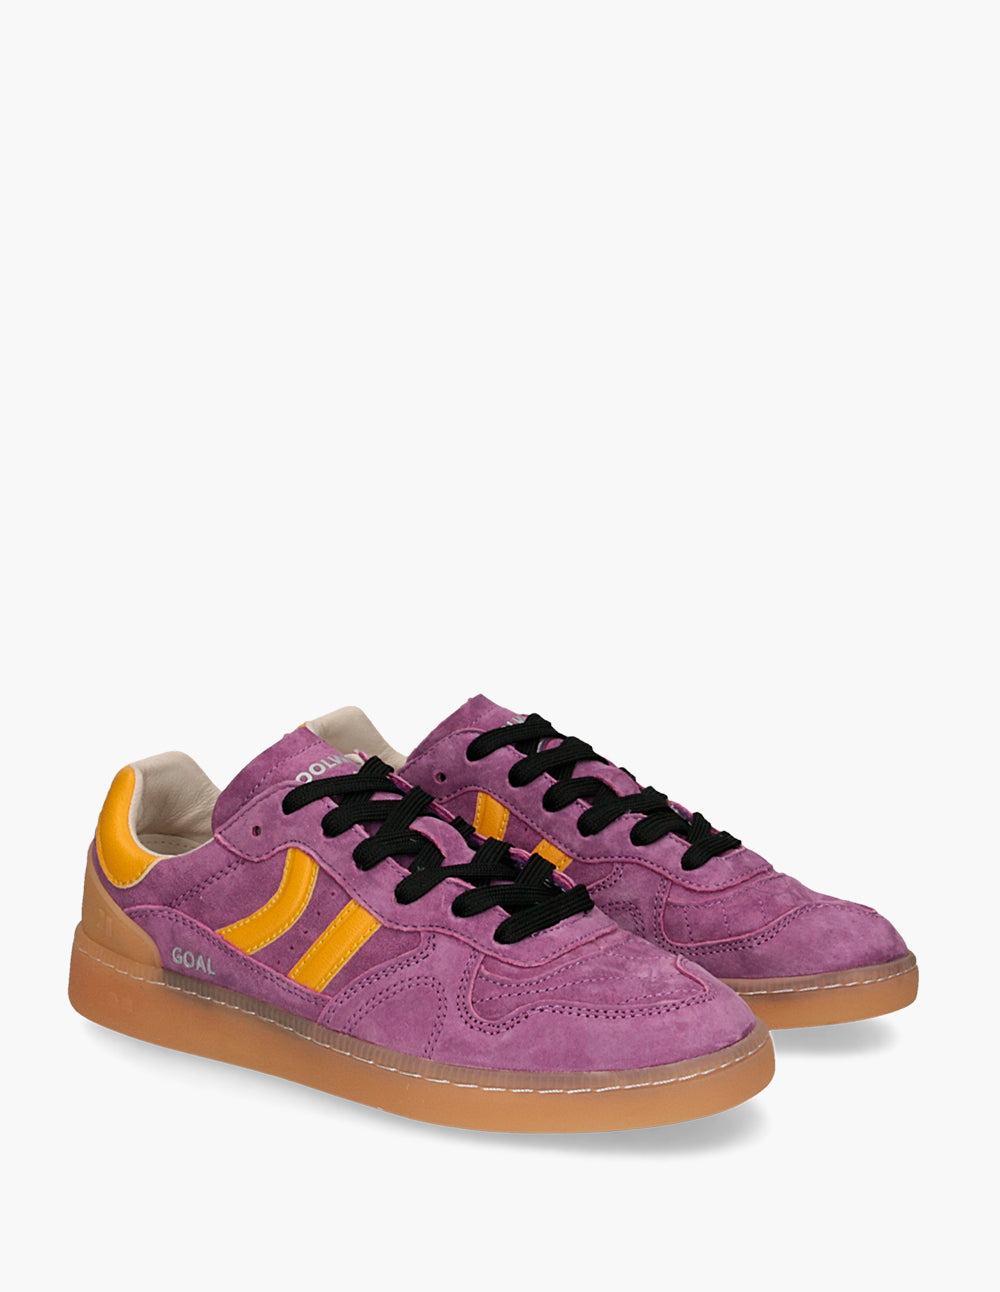 BUT VIOLET LAKERS HOMME